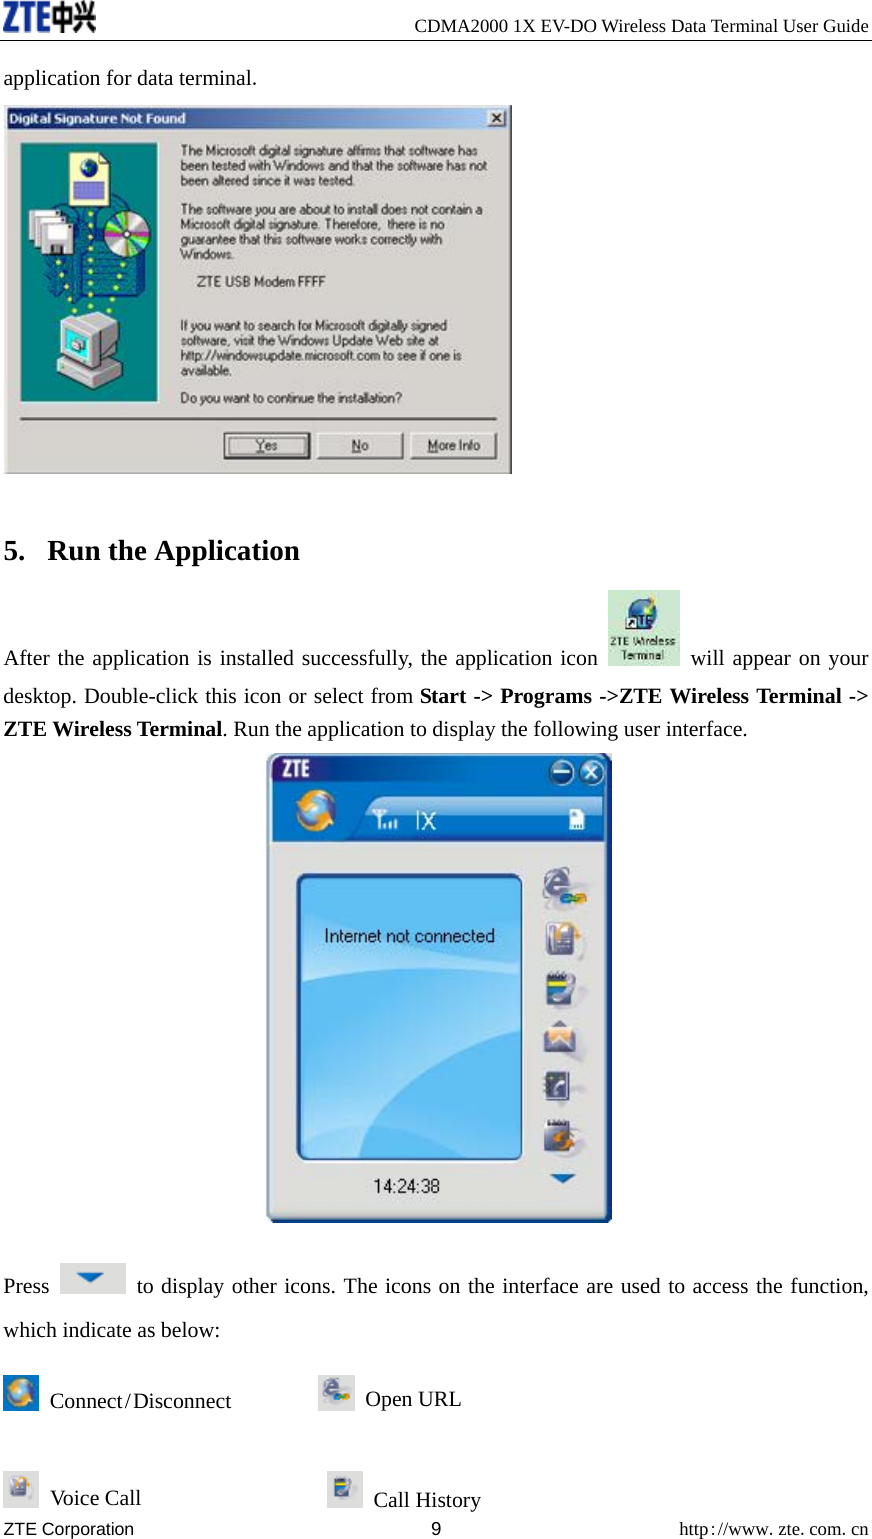     CDMA2000 1X EV-DO Wireless Data Terminal User Guide ZTE Corporation 9 http://www.zte.com.cn  application for data terminal.   5. Run the Application After the application is installed successfully, the application icon   will appear on your desktop. Double-click this icon or select from Start -&gt; Programs -&gt;ZTE Wireless Terminal -&gt; ZTE Wireless Terminal. Run the application to display the following user interface.  Press    to display other icons. The icons on the interface are used to access the function, which indicate as below:  Connect / Disconnect          Open URL  Voice Call                   Call History 